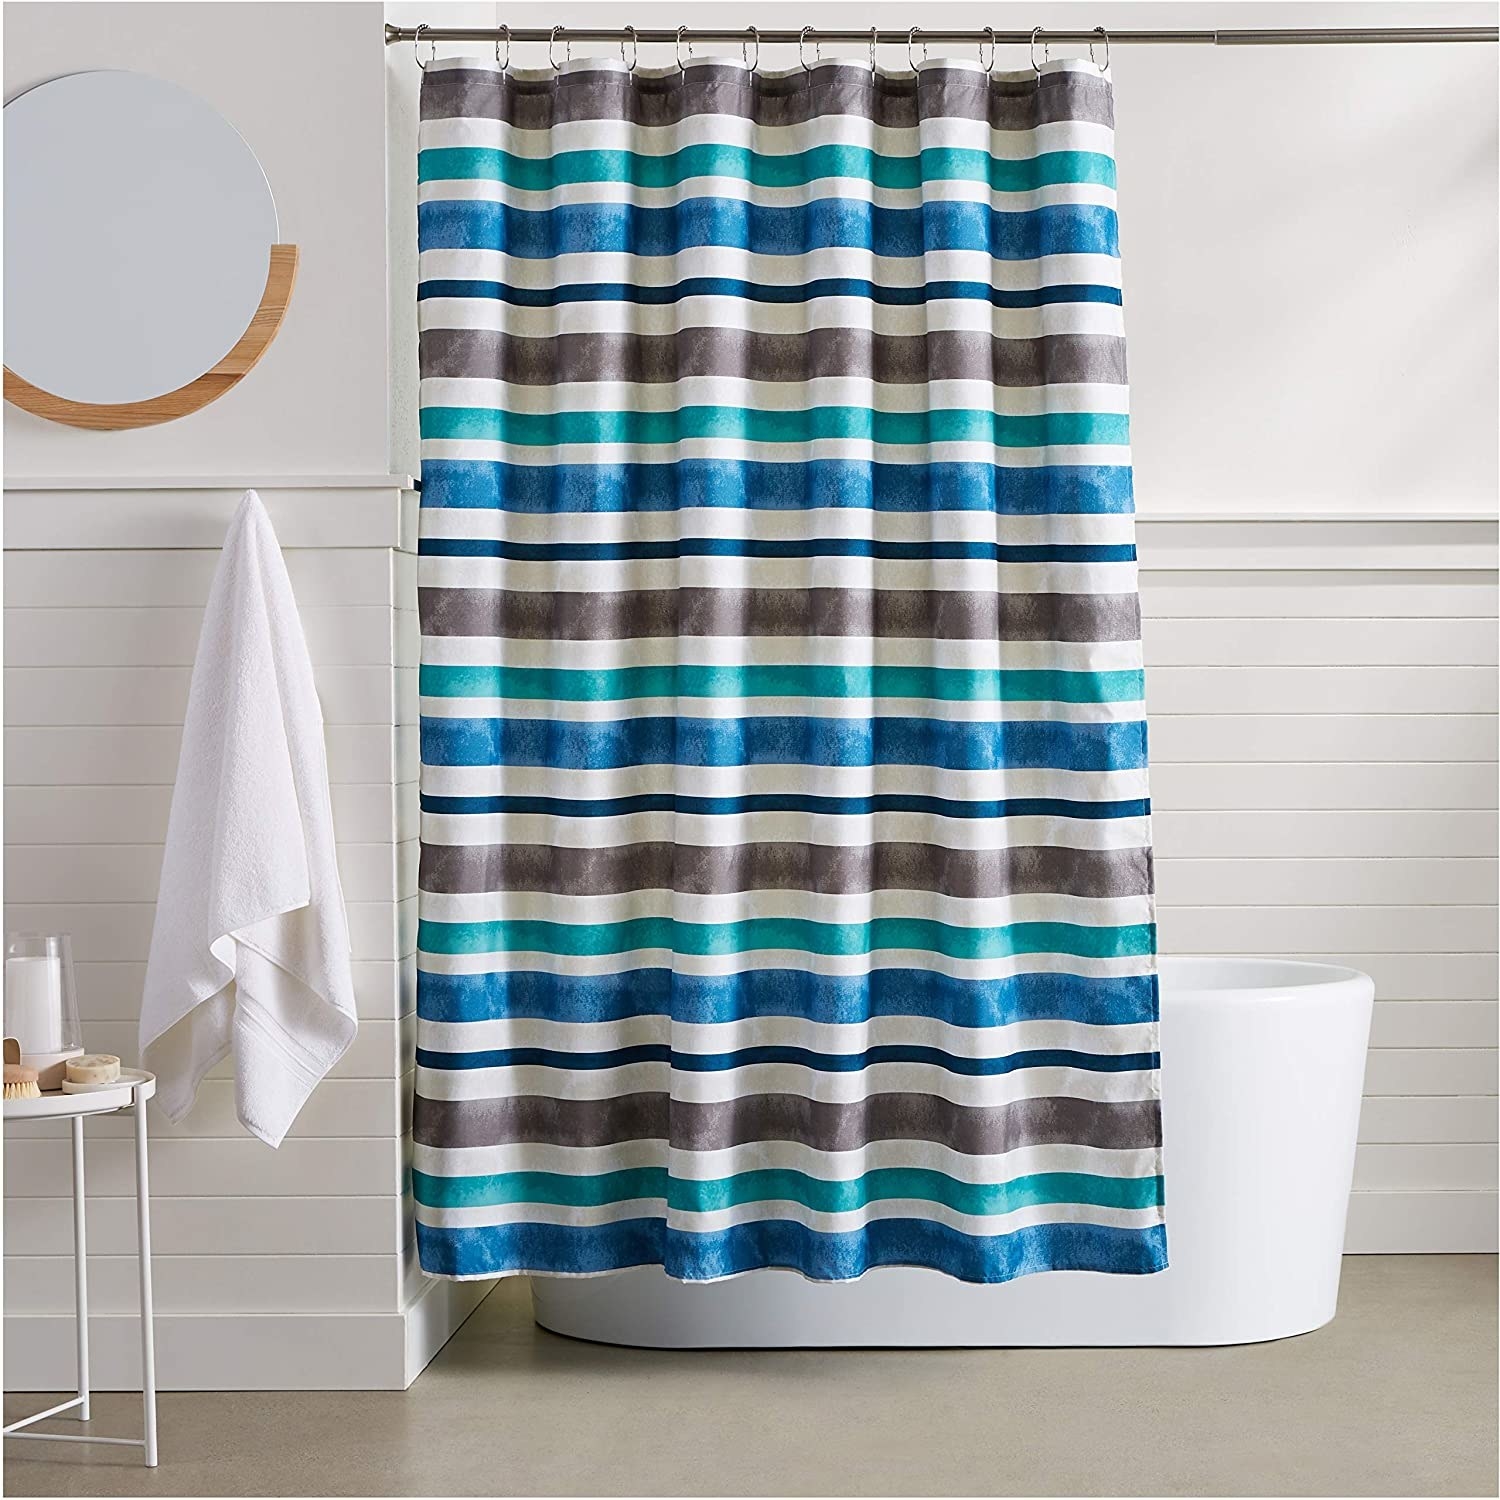 A striped shower curtain hung next to an elegant free-standing tub